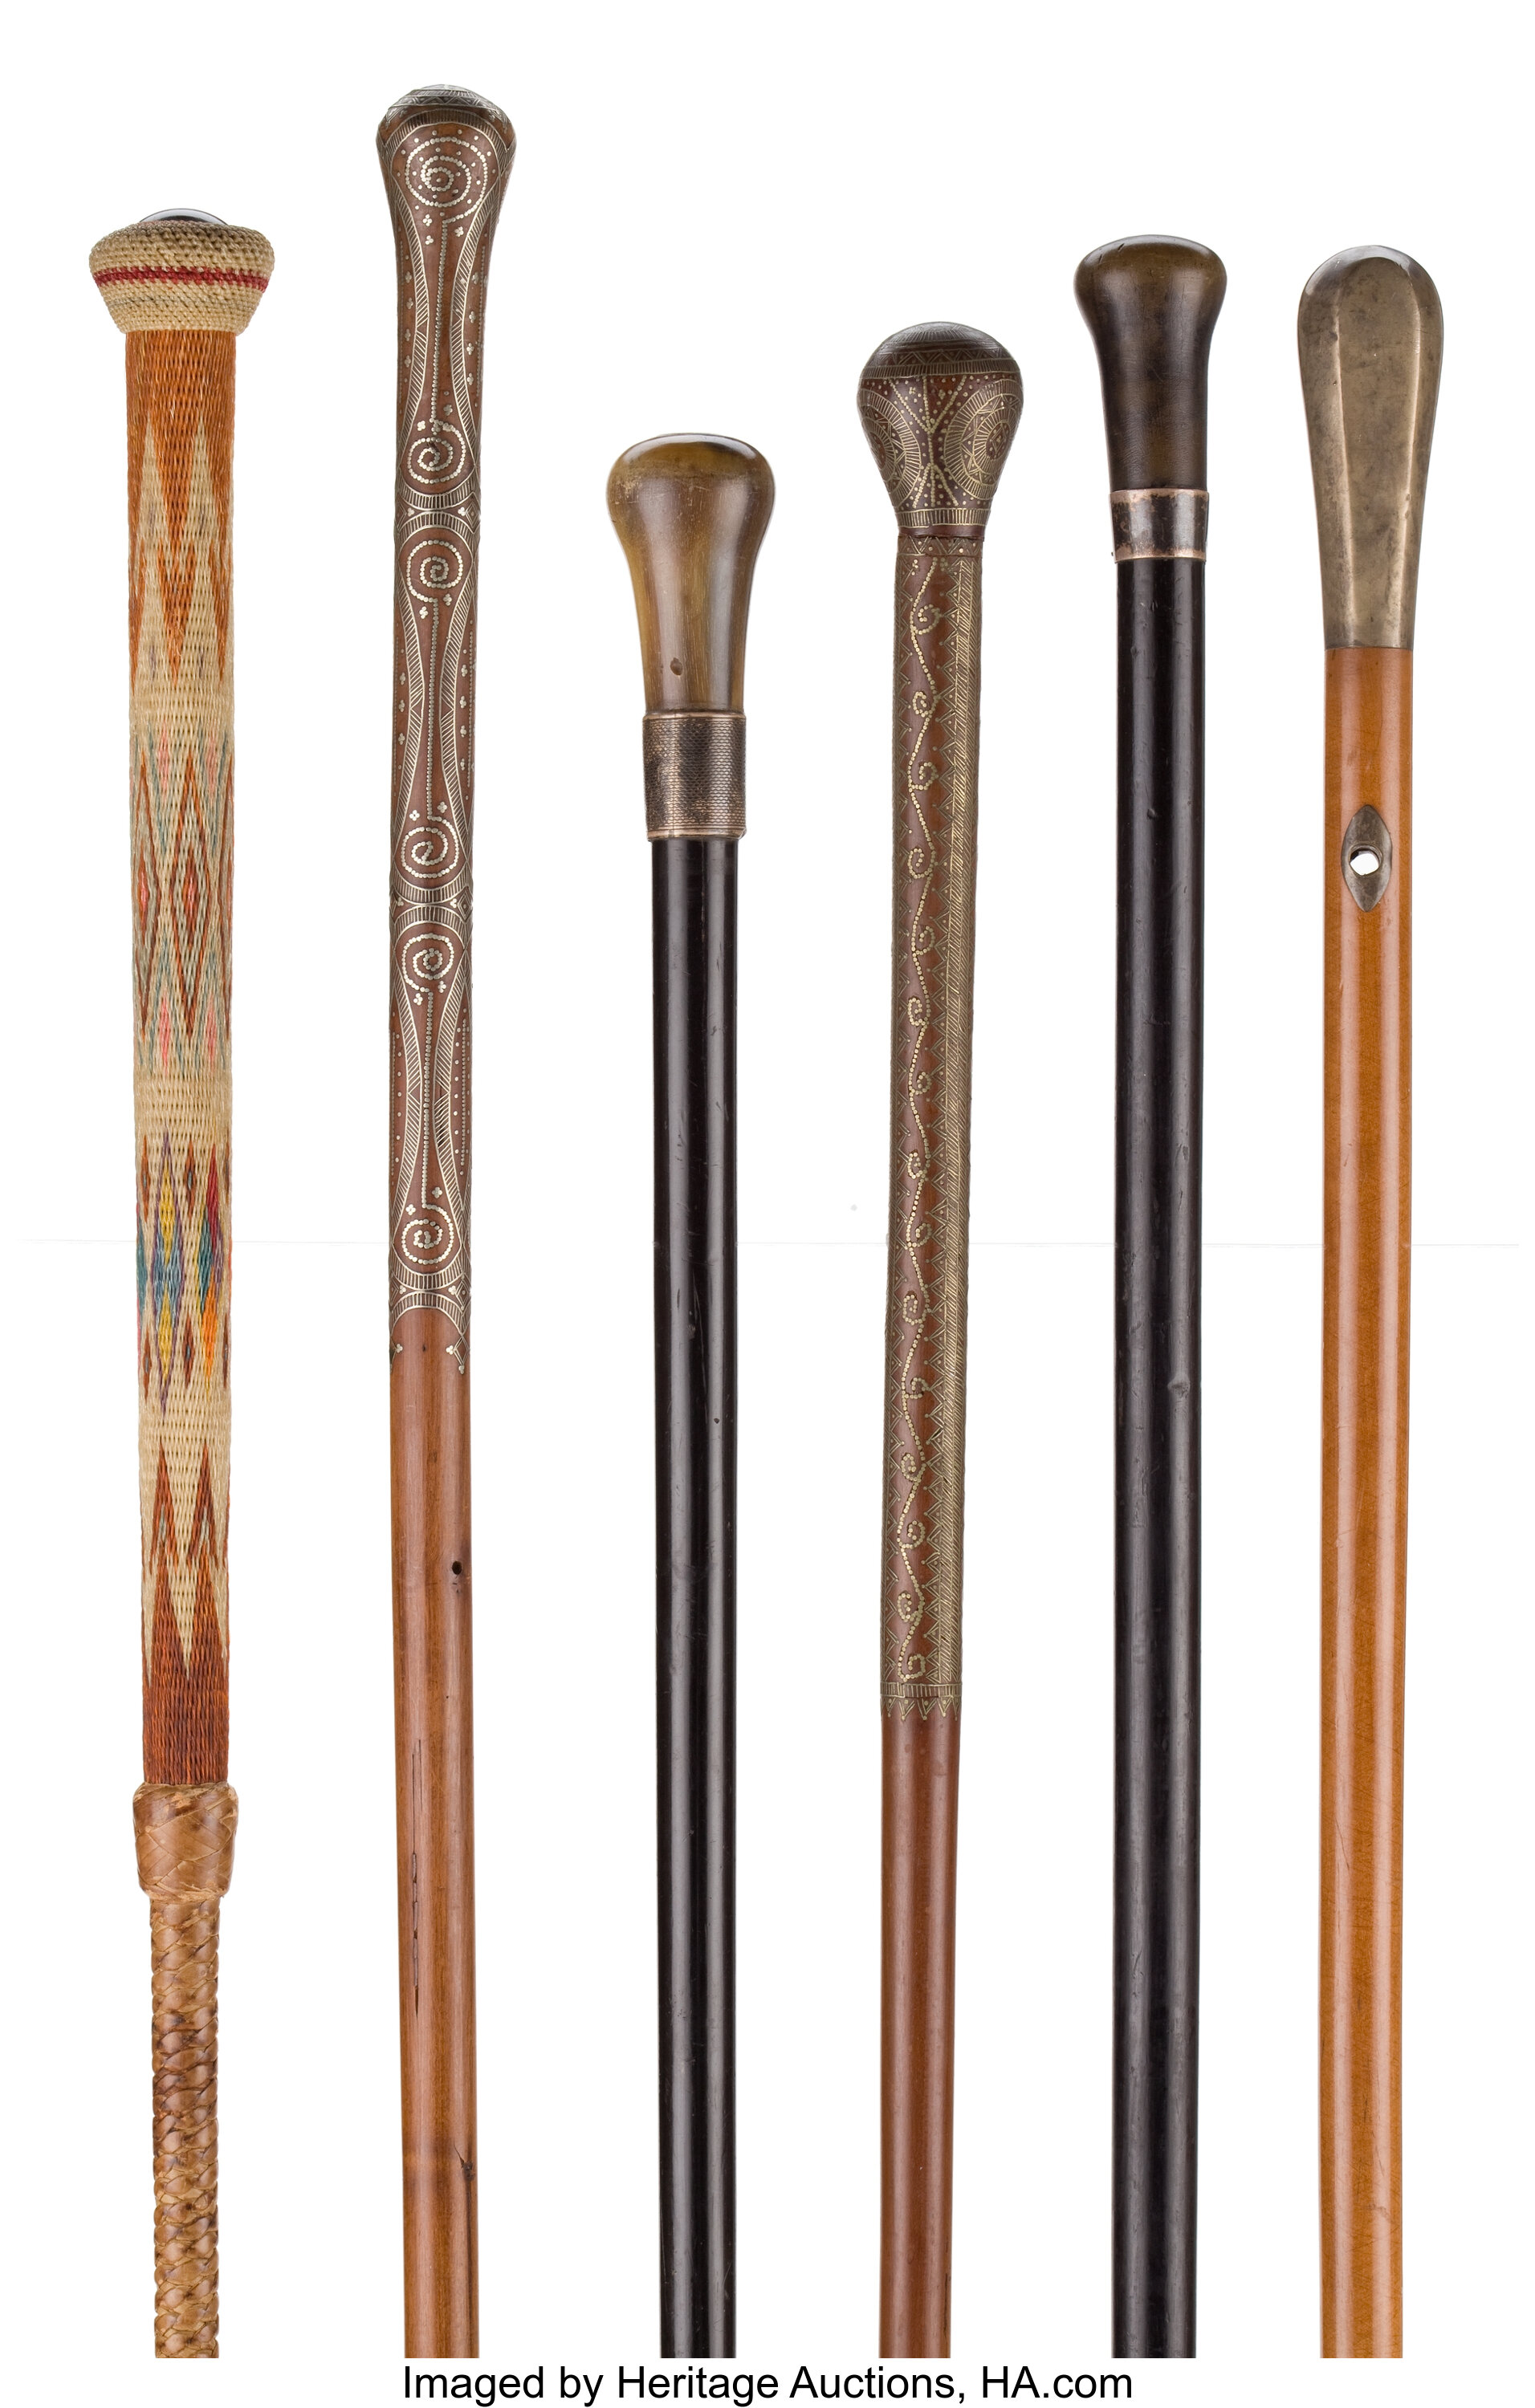 GROUP OF SIX GENTLEMAN'S WALKING STICK CANES . 37 inches overall